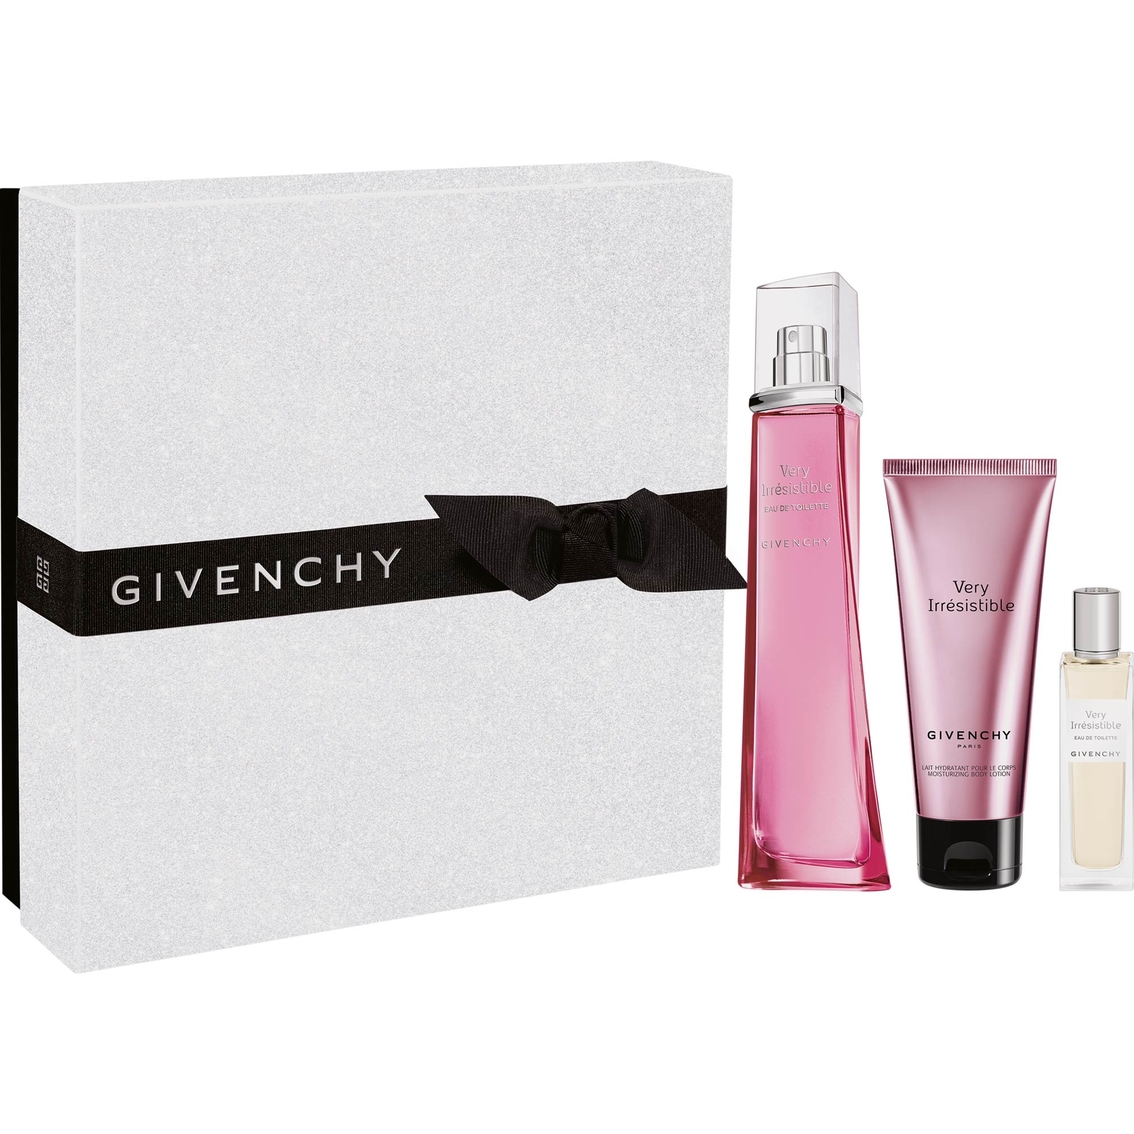 Givenchy Very Irresistible Eau De Toilette Gift Set | Gifts Sets For Her |  Beauty & Health | Shop The Exchange